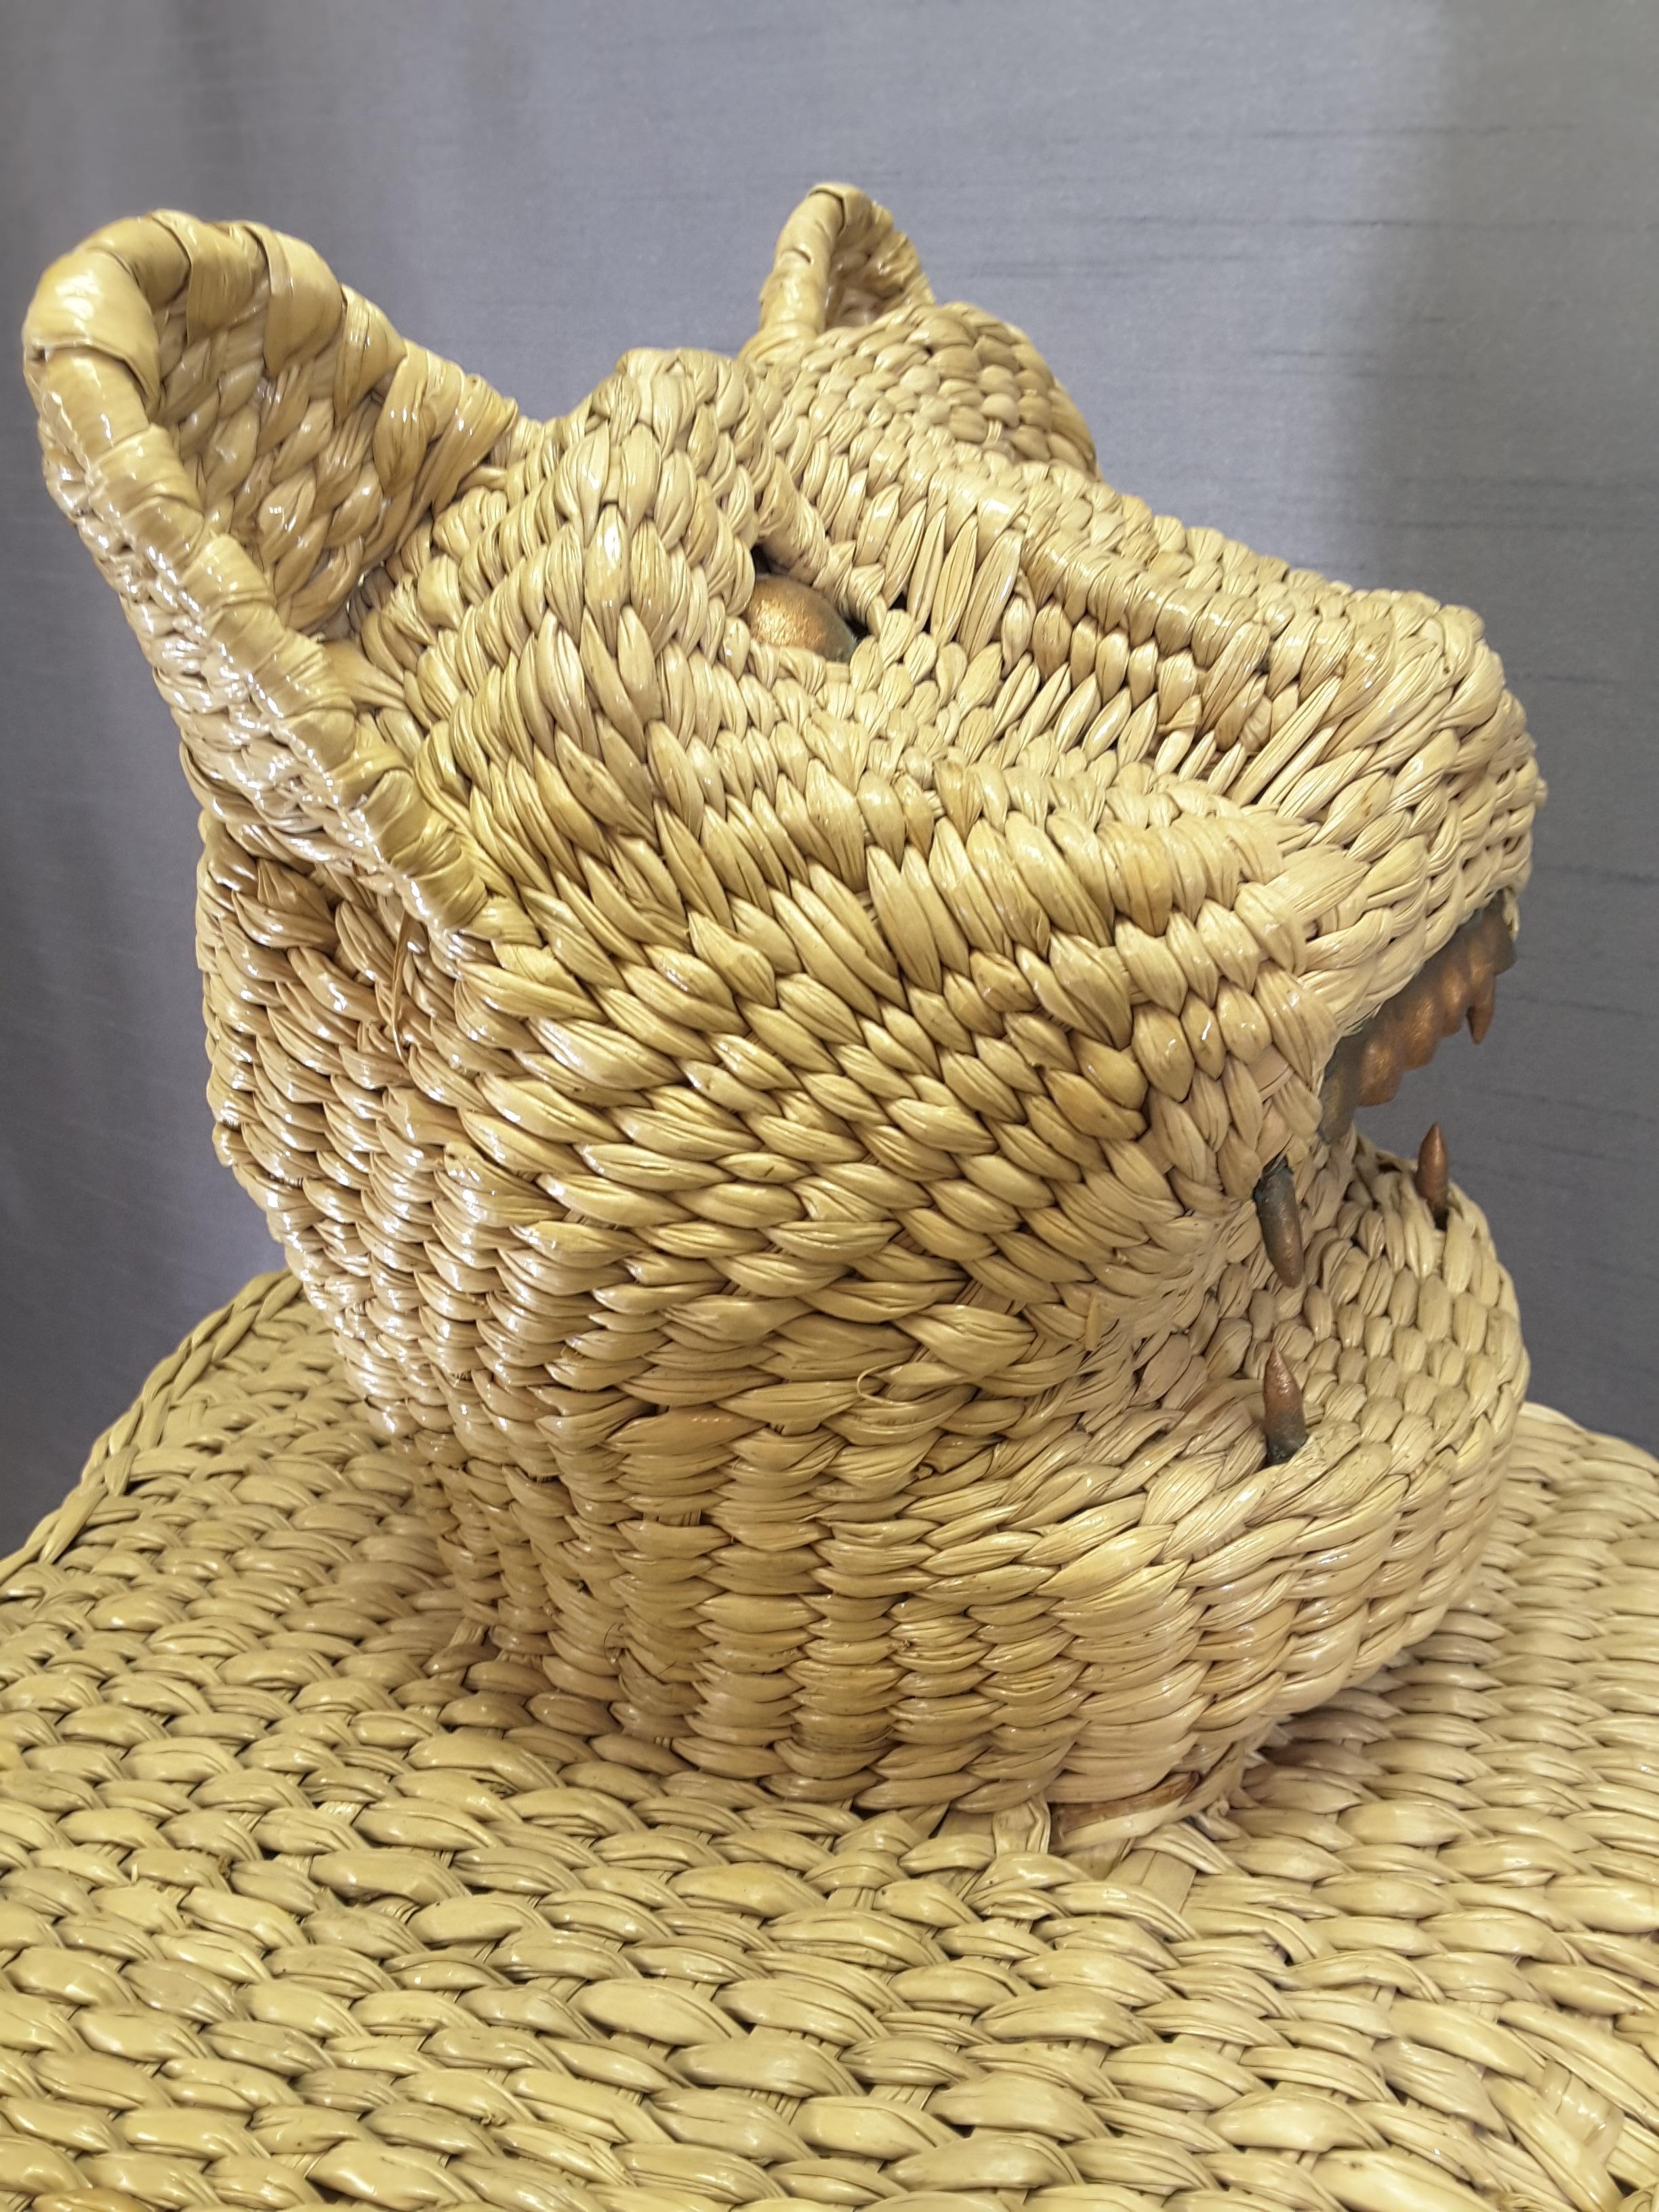 Mario Lopez Torres Wicker Panther Stool, Early 1970s For Sale 7